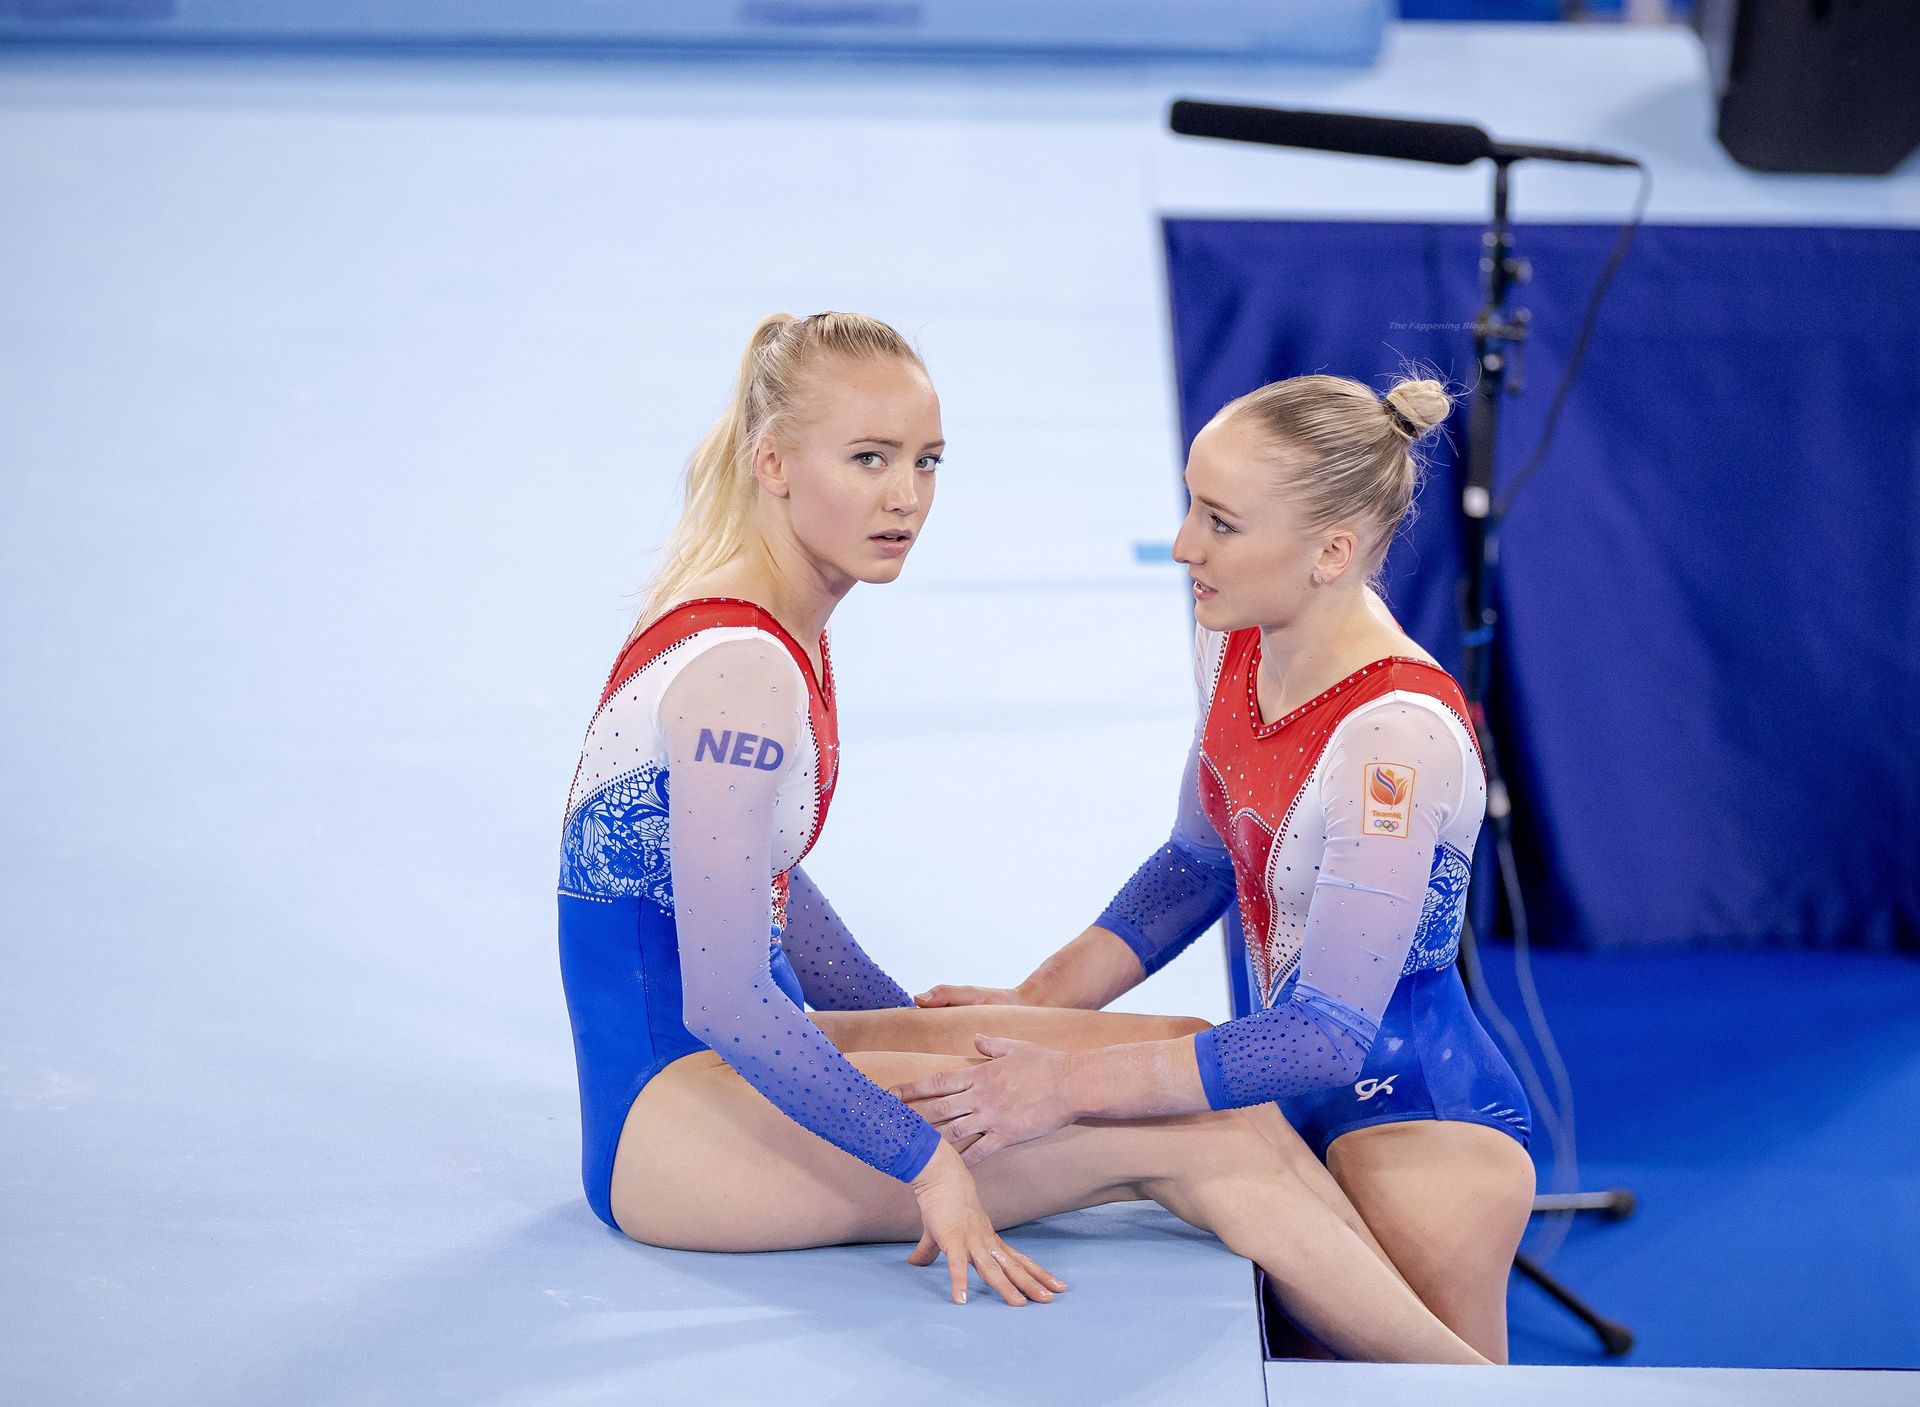 Sanne & Lieke Wevers are Pictured at the Ariake Gymnastics Centre in Tokyo (16 Photos)